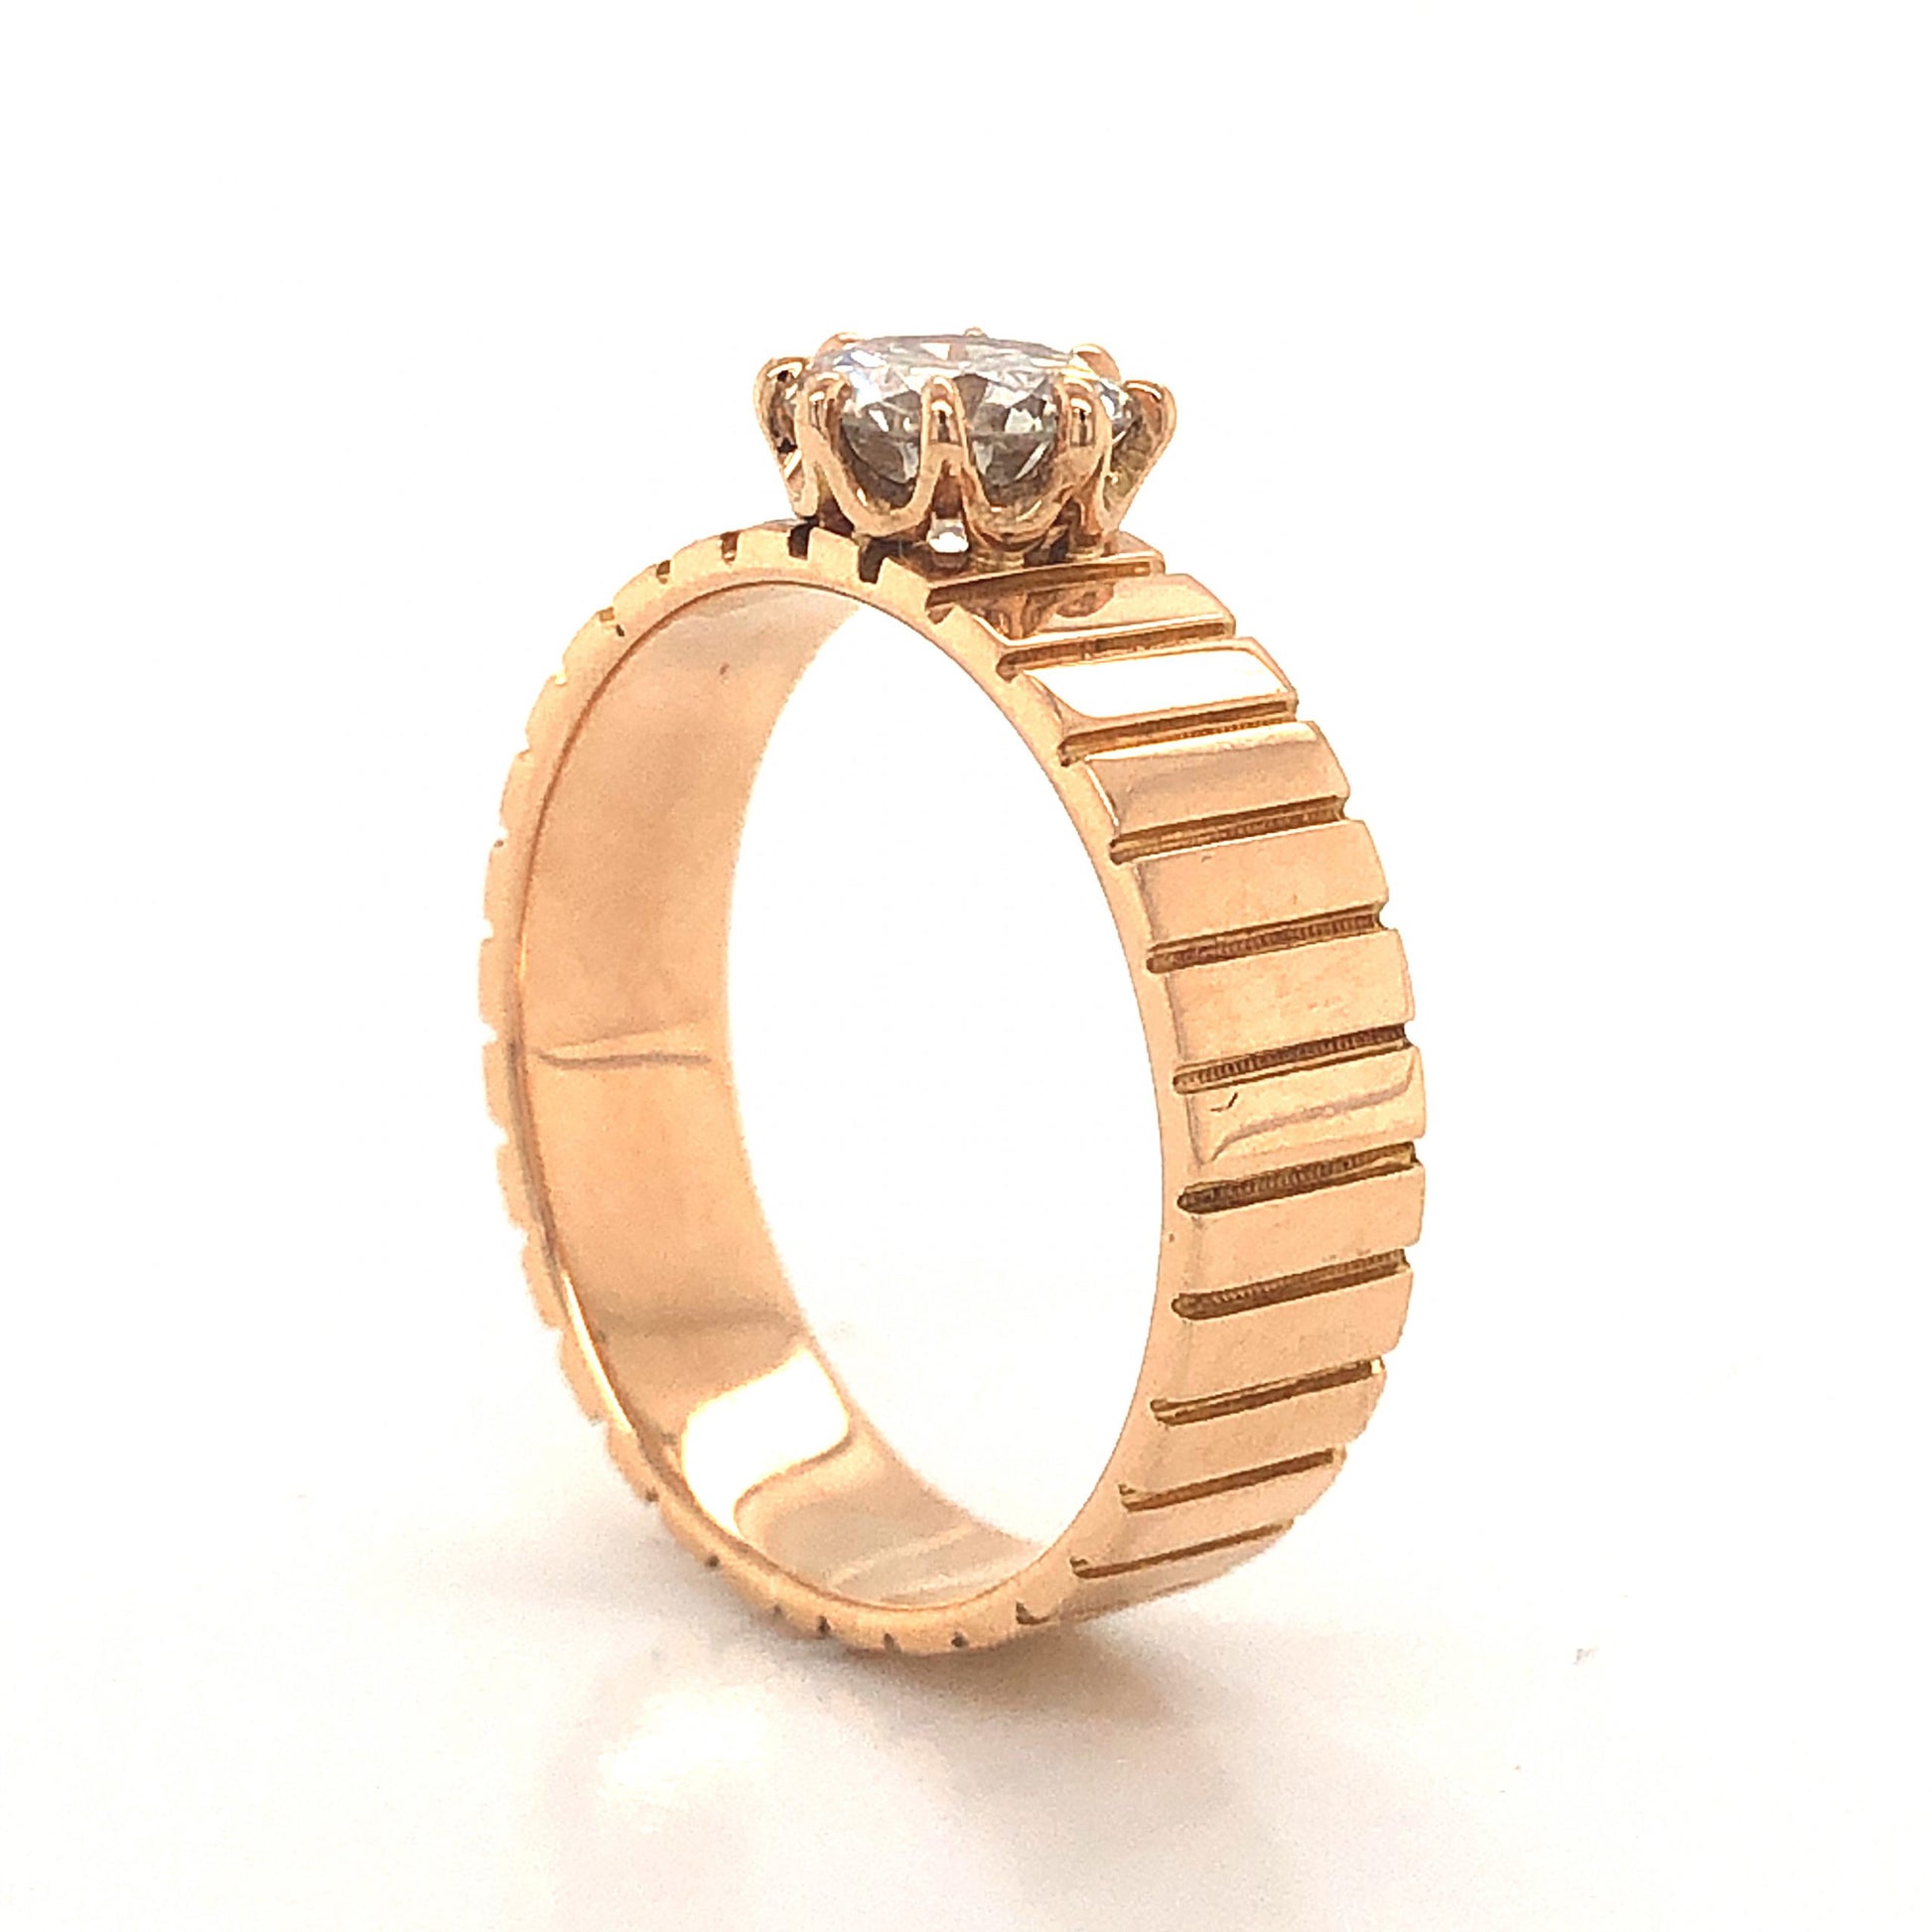 Mid-Century .70 Diamond Engagement Ring in 14k Yellow GoldComposition: 14 Karat Yellow Gold Ring Size: 6 Total Diamond Weight: .70ct Total Gram Weight: 4.3 g